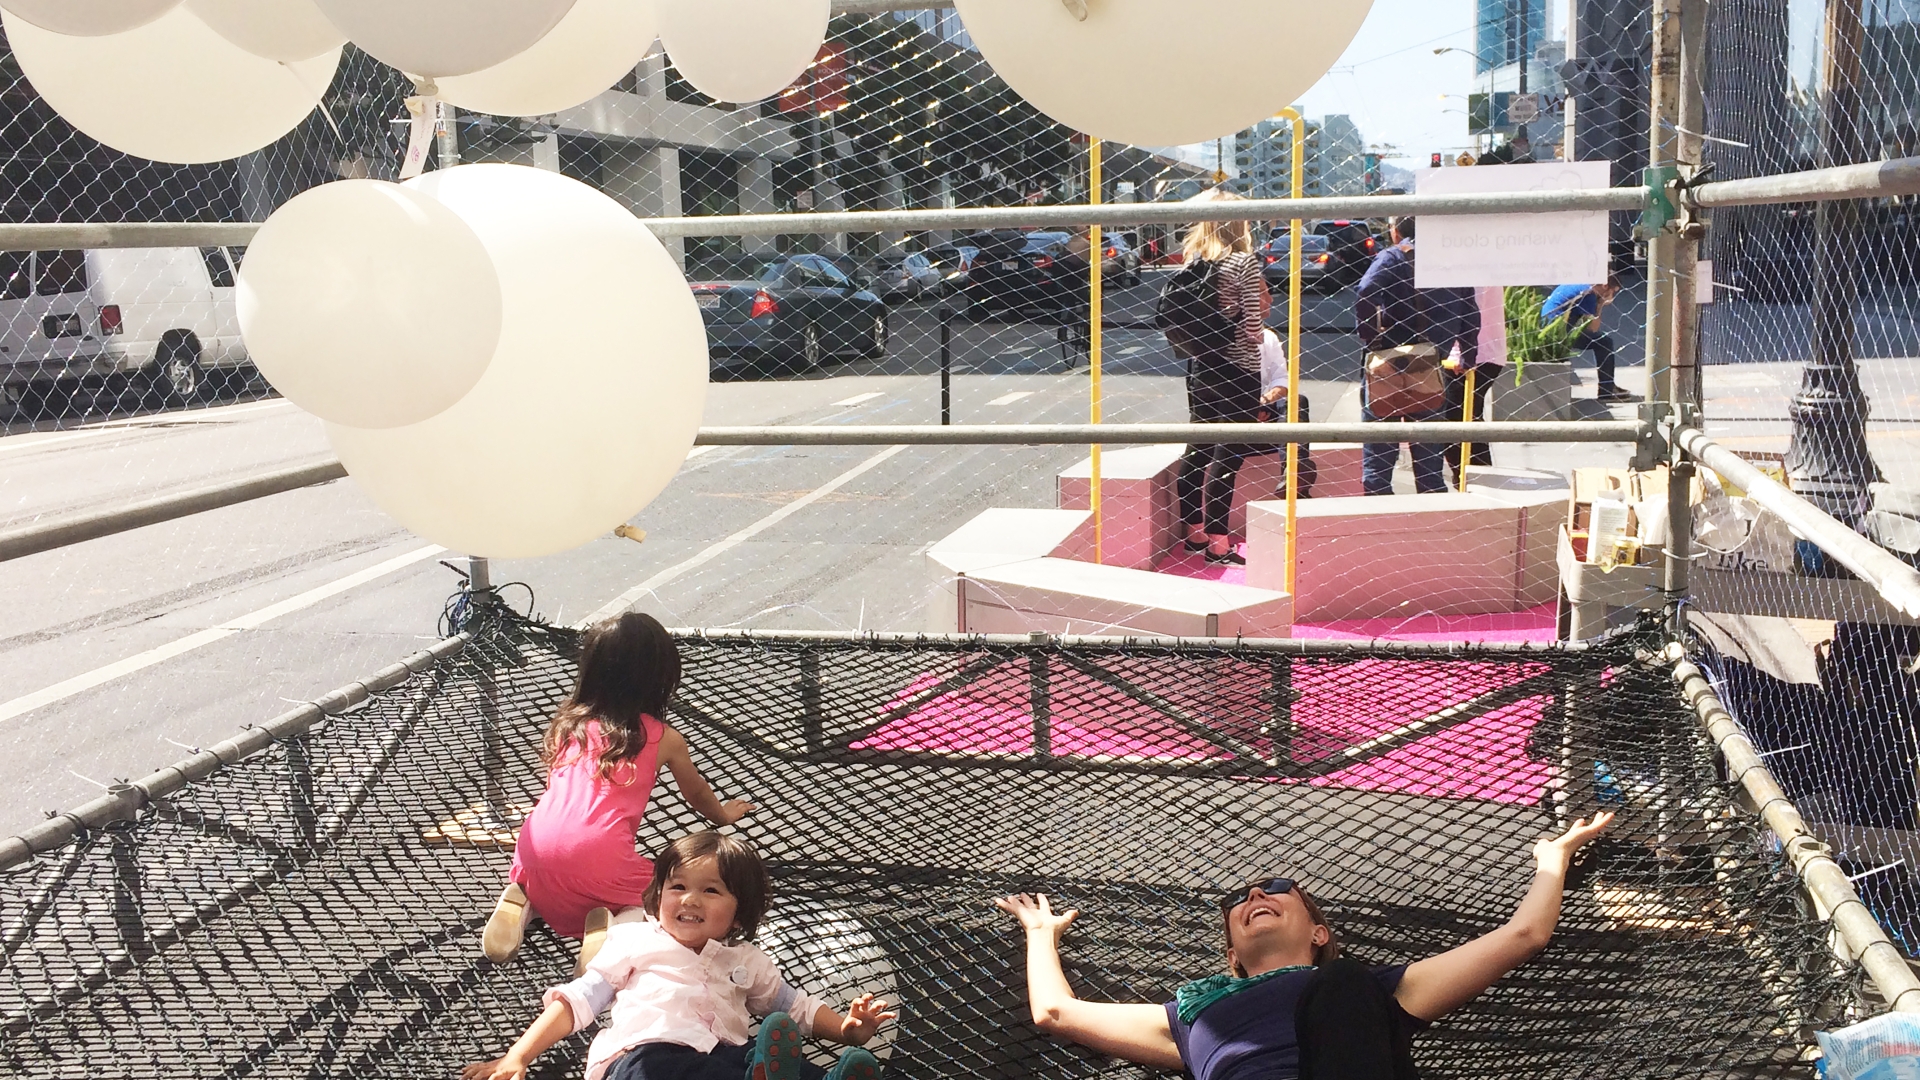 Woman and two children laying down in the net Wishing Cloud enclosure looking at the balloons.